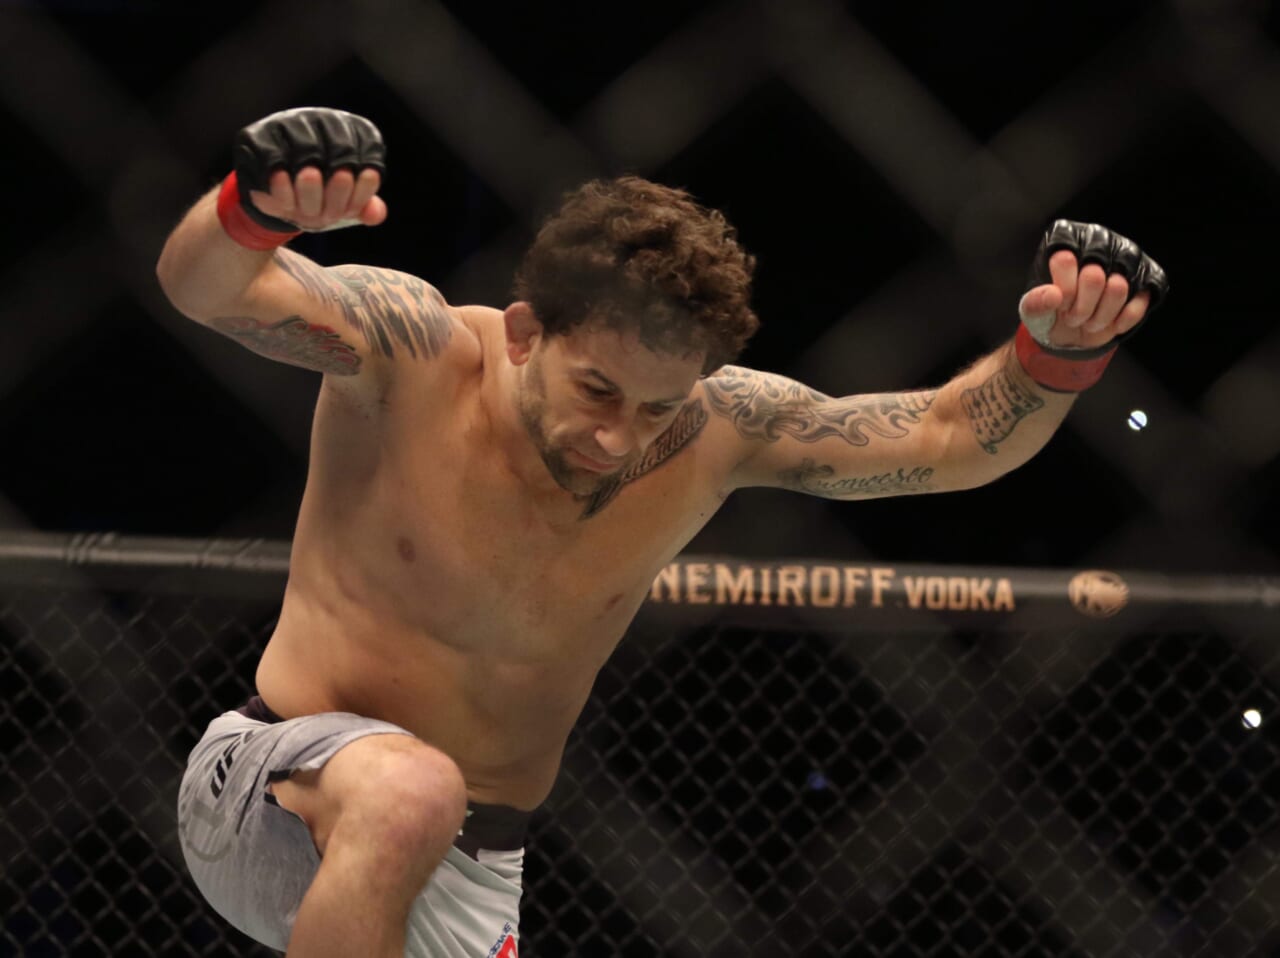 After a brutal knockout loss at UFC Vegas 18, what’s next for Frankie Edgar?